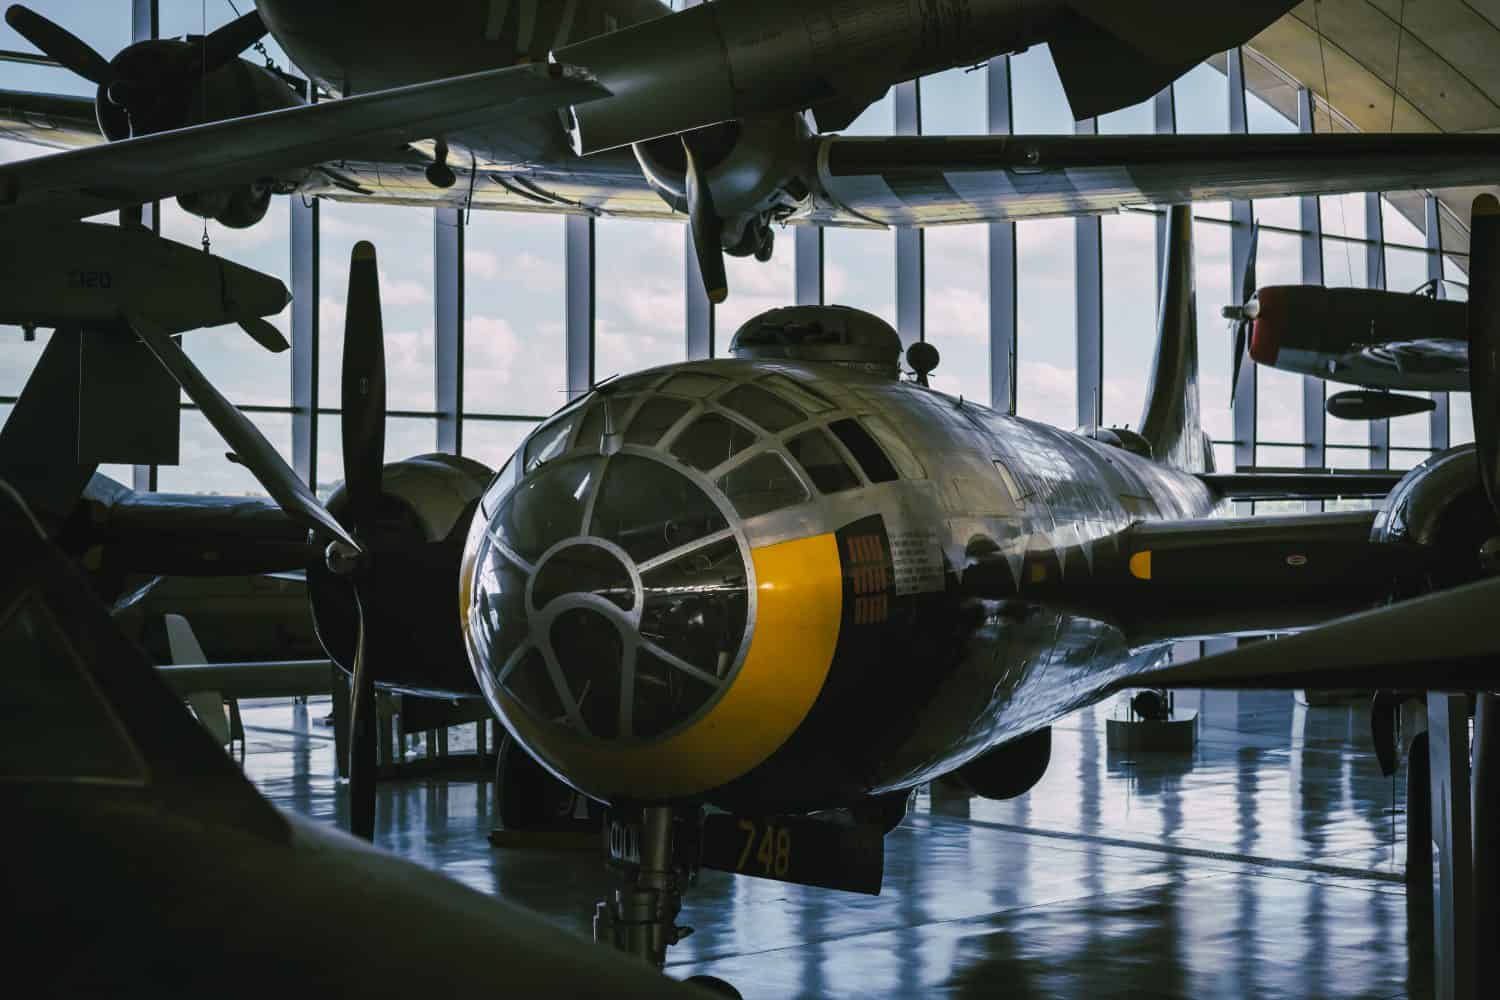 B-29 Super-fortress bomber on the museum display.